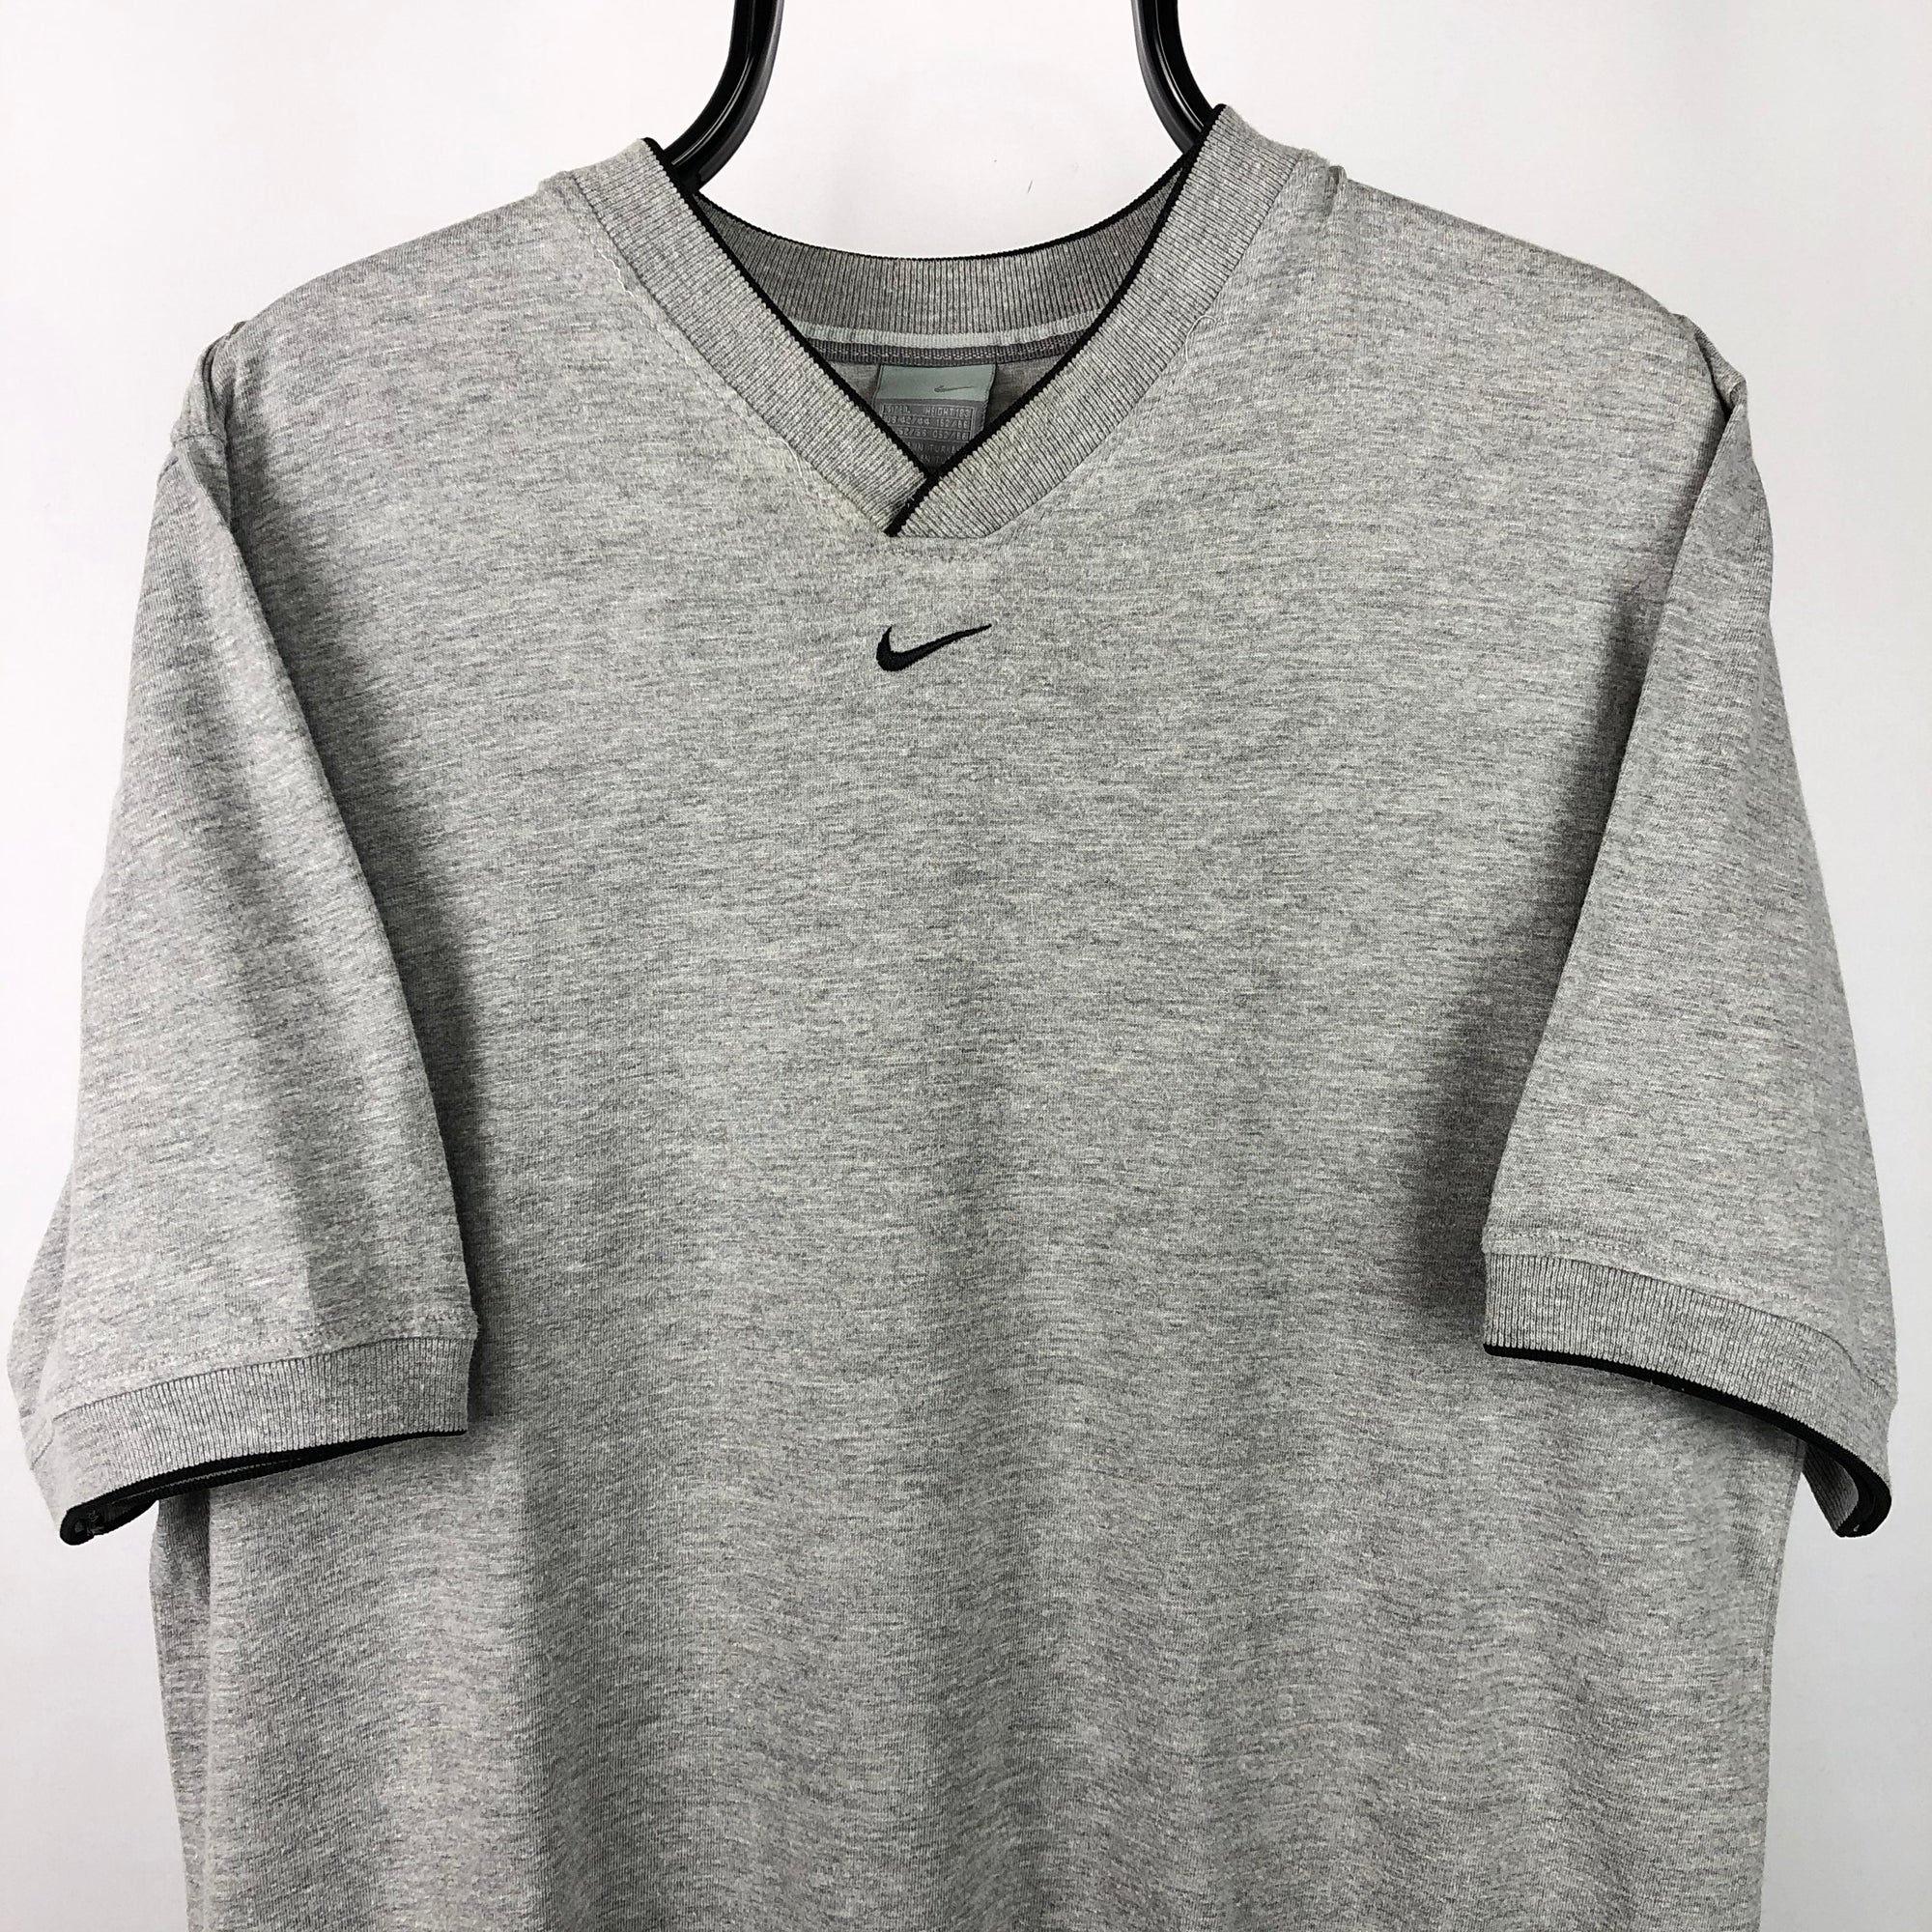 Vintage Nike Embroidered Centre Swoosh Tee in Grey - Men's Large/Women's XL